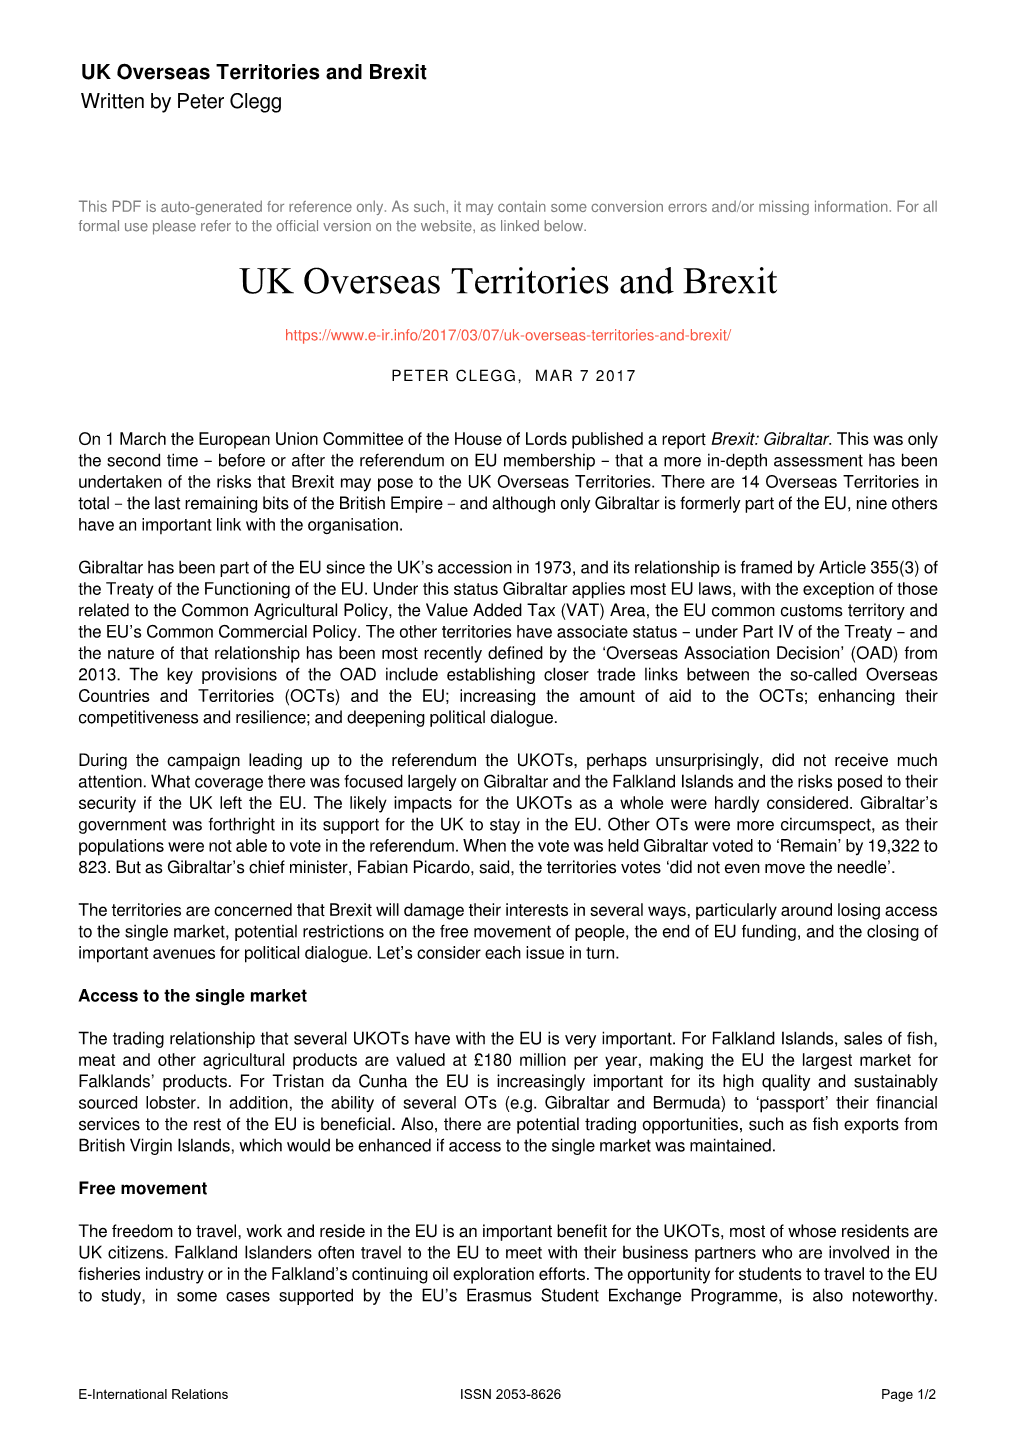 UK Overseas Territories and Brexit Written by Peter Clegg